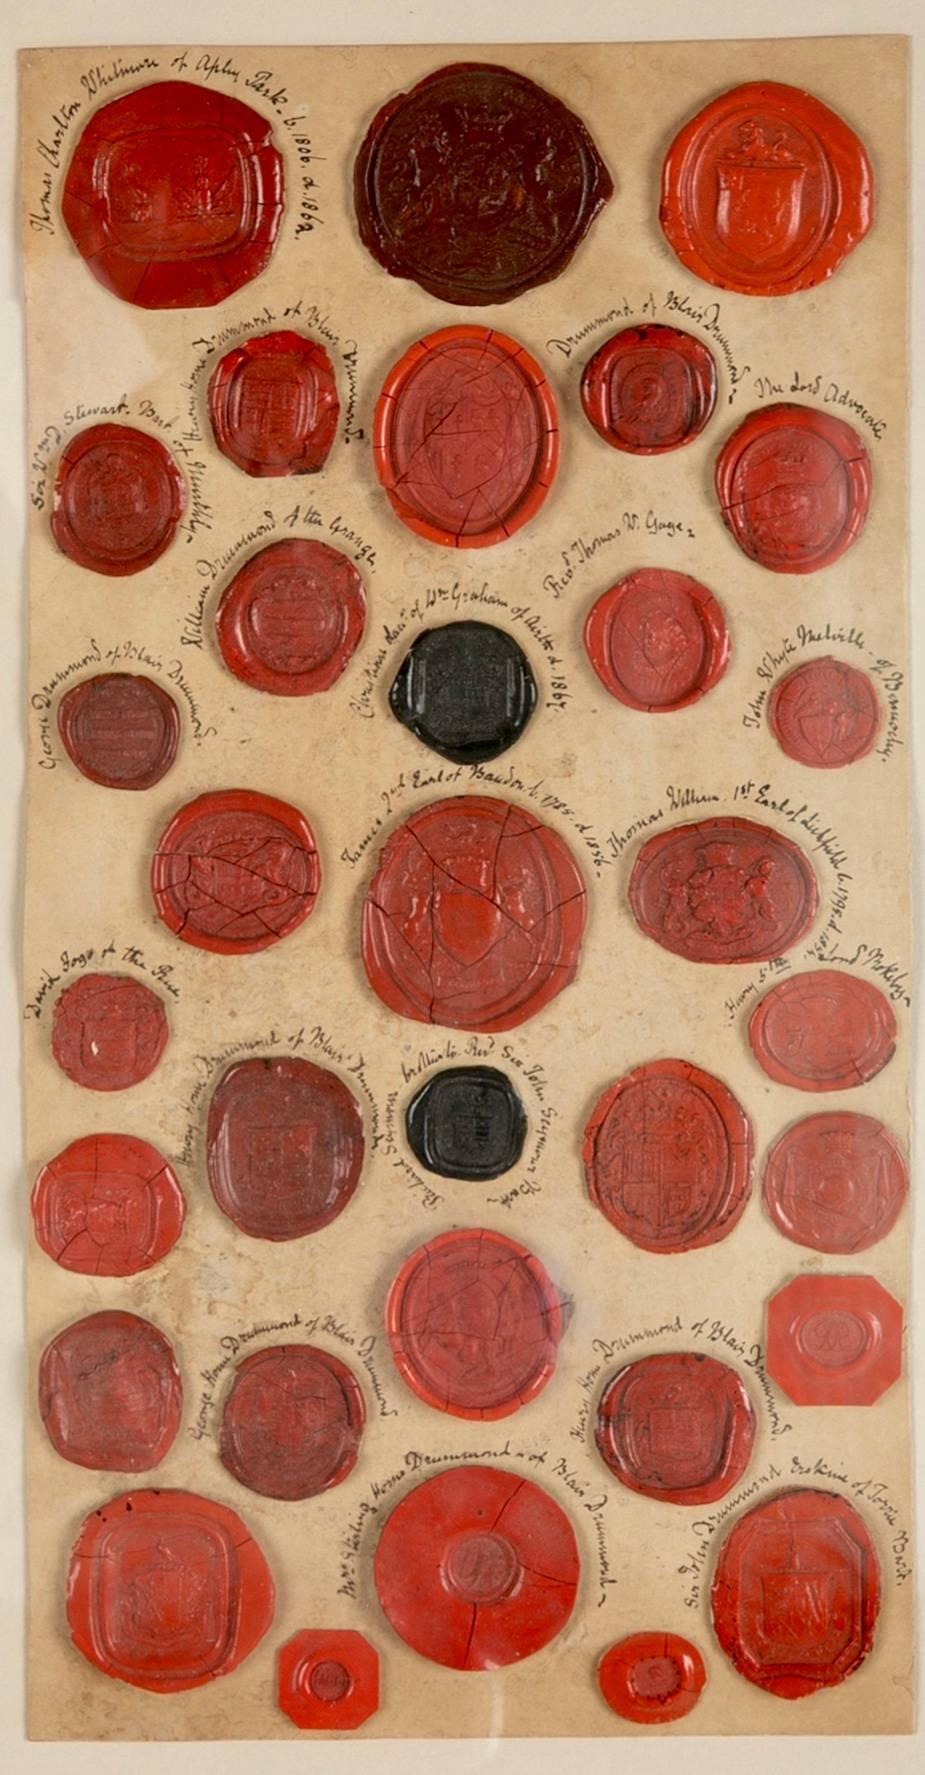 18th-19th century English and mostly Scottish collection of 33 red wax seals bearing the armorials and coats of arms of various personages. Many of the surname Drummond from Blair Drummond in Scotland. Each one a small piece of history from a time